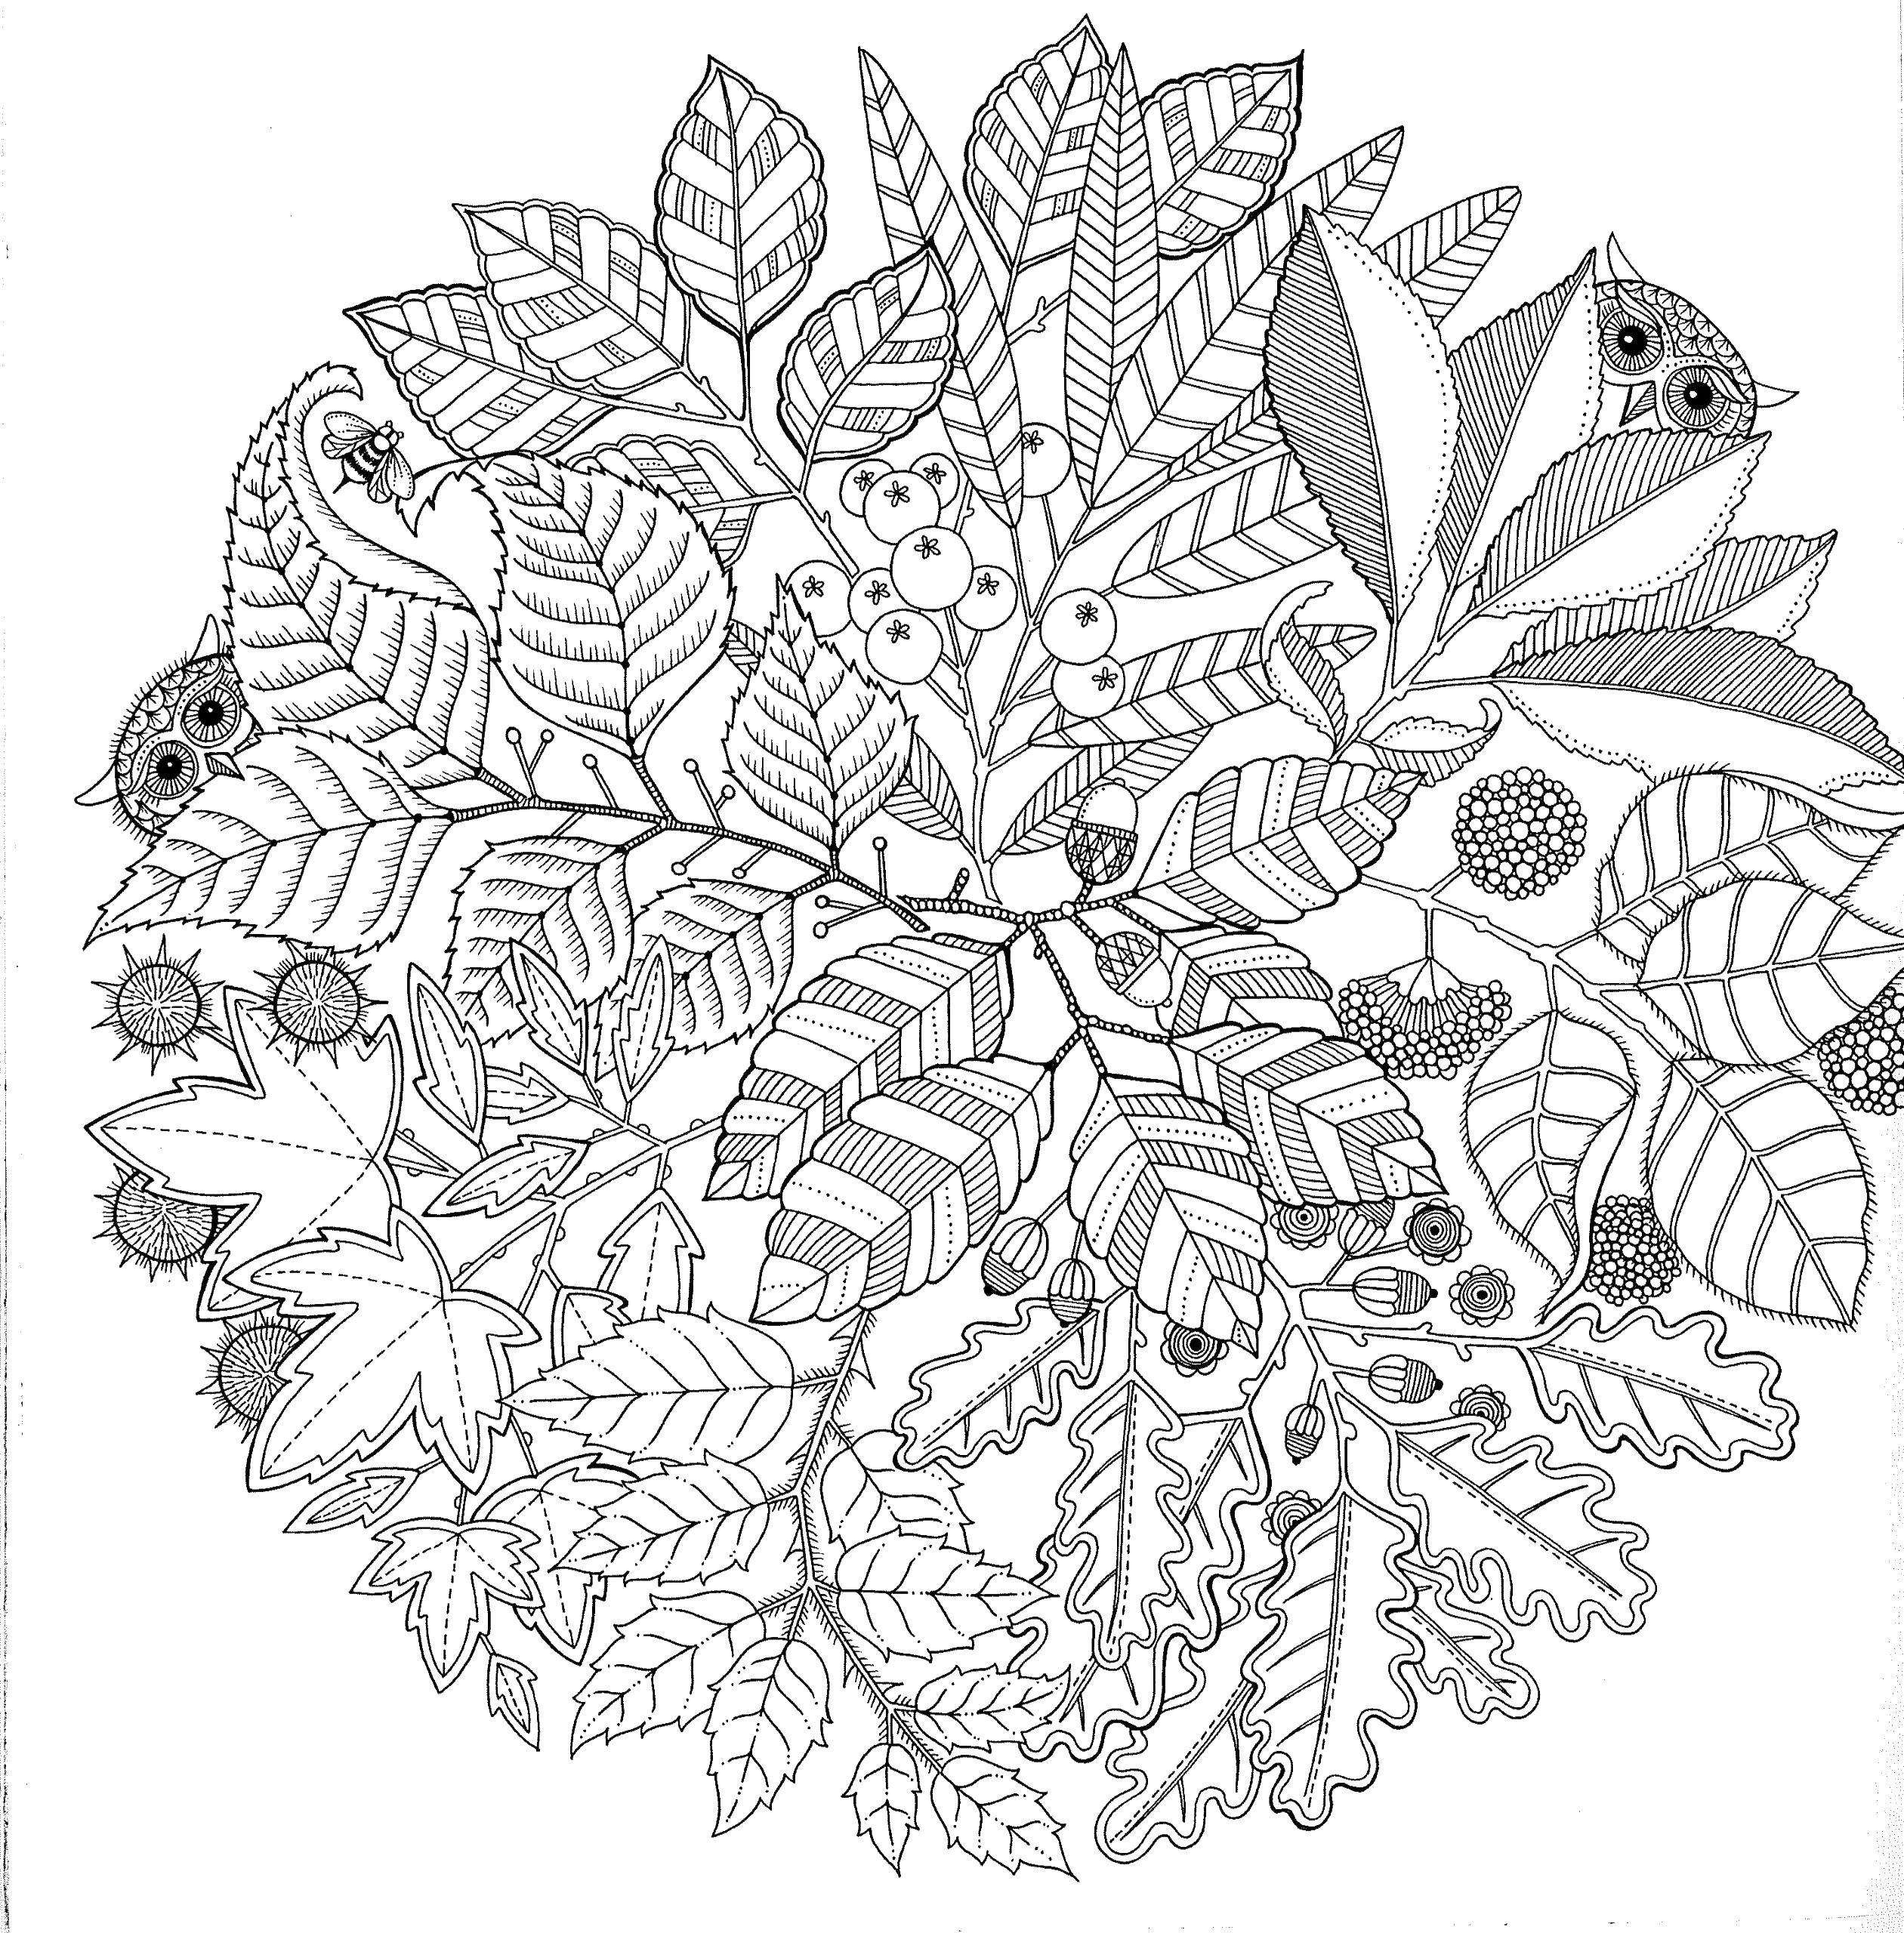 Coloring Patterns. Category patterns. Tags:  patterns, shapes, stress relief, flowers.